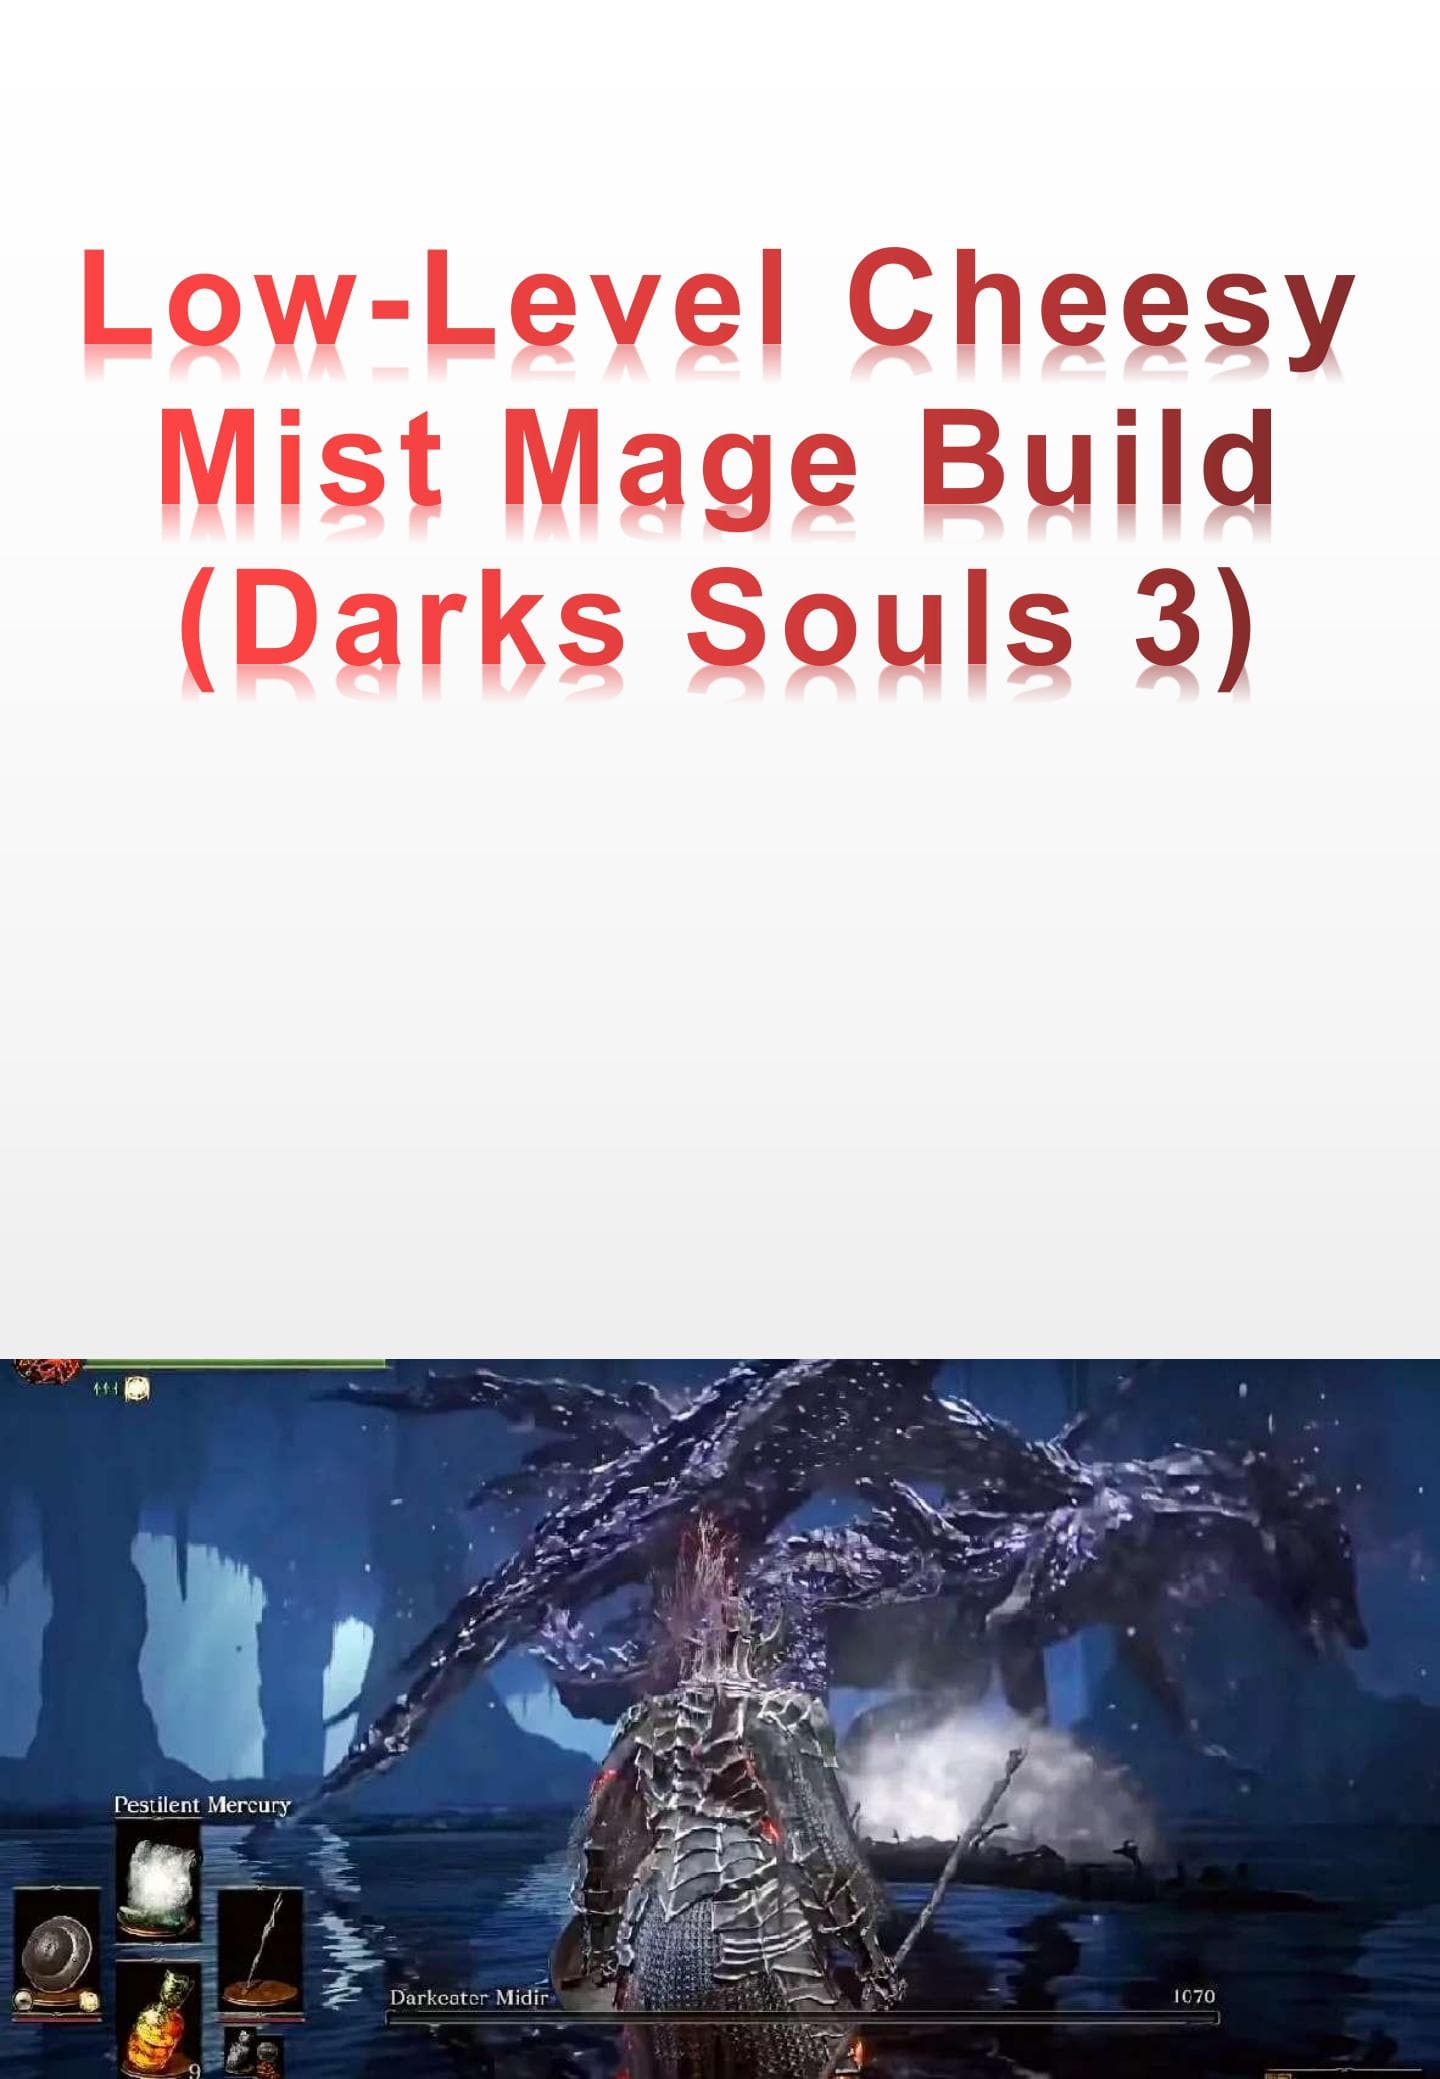 Low-Level Cheesy Mist Mage Build - (Darks Souls 3)